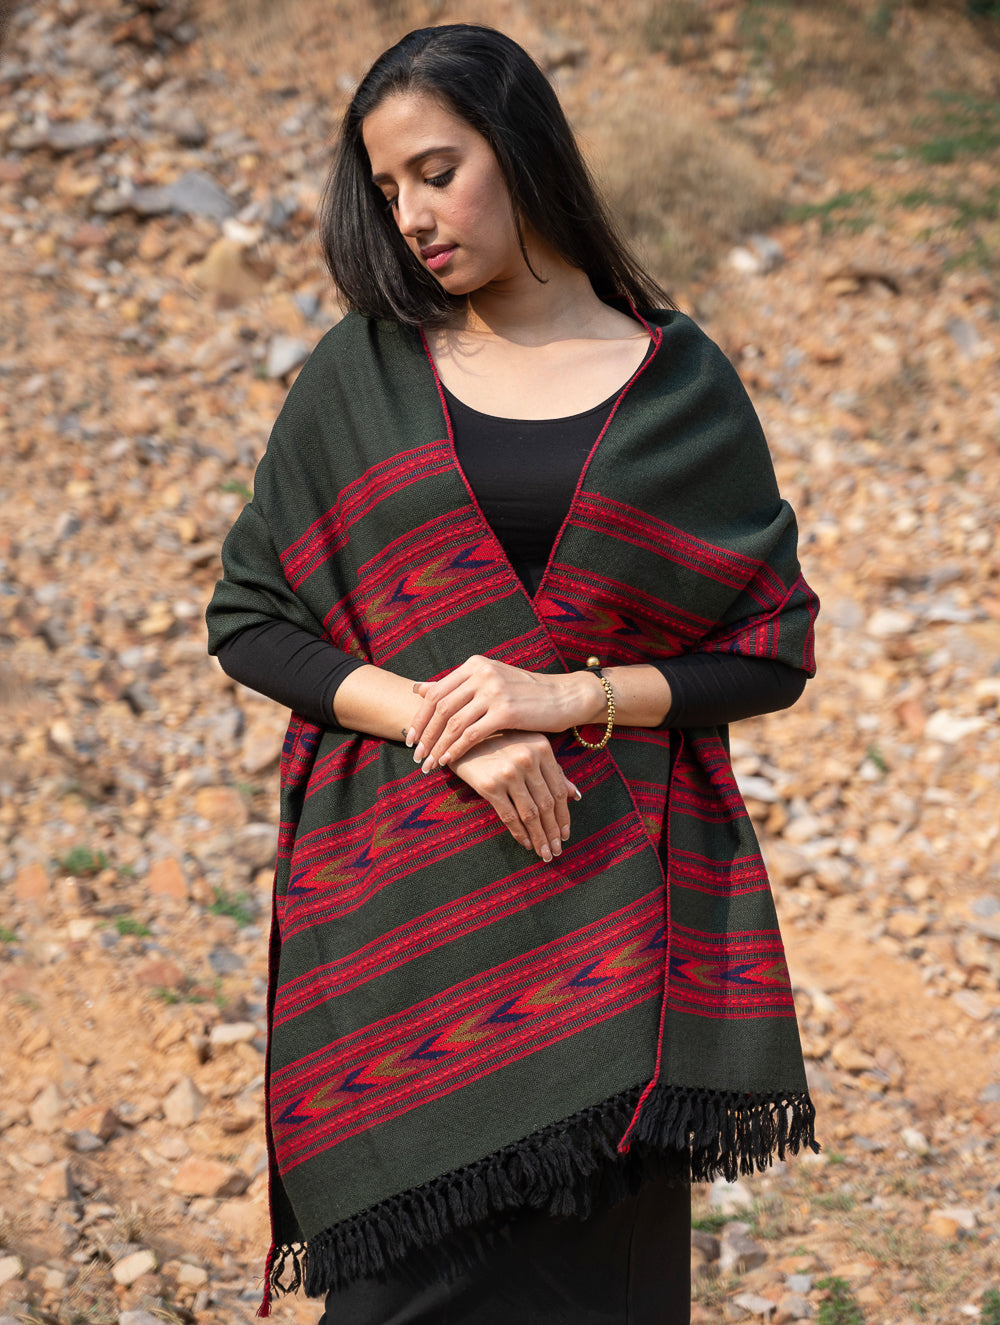 Load image into Gallery viewer, Exclusive, Soft Himachal Wool Stole - 6 Panels, Deep Olive